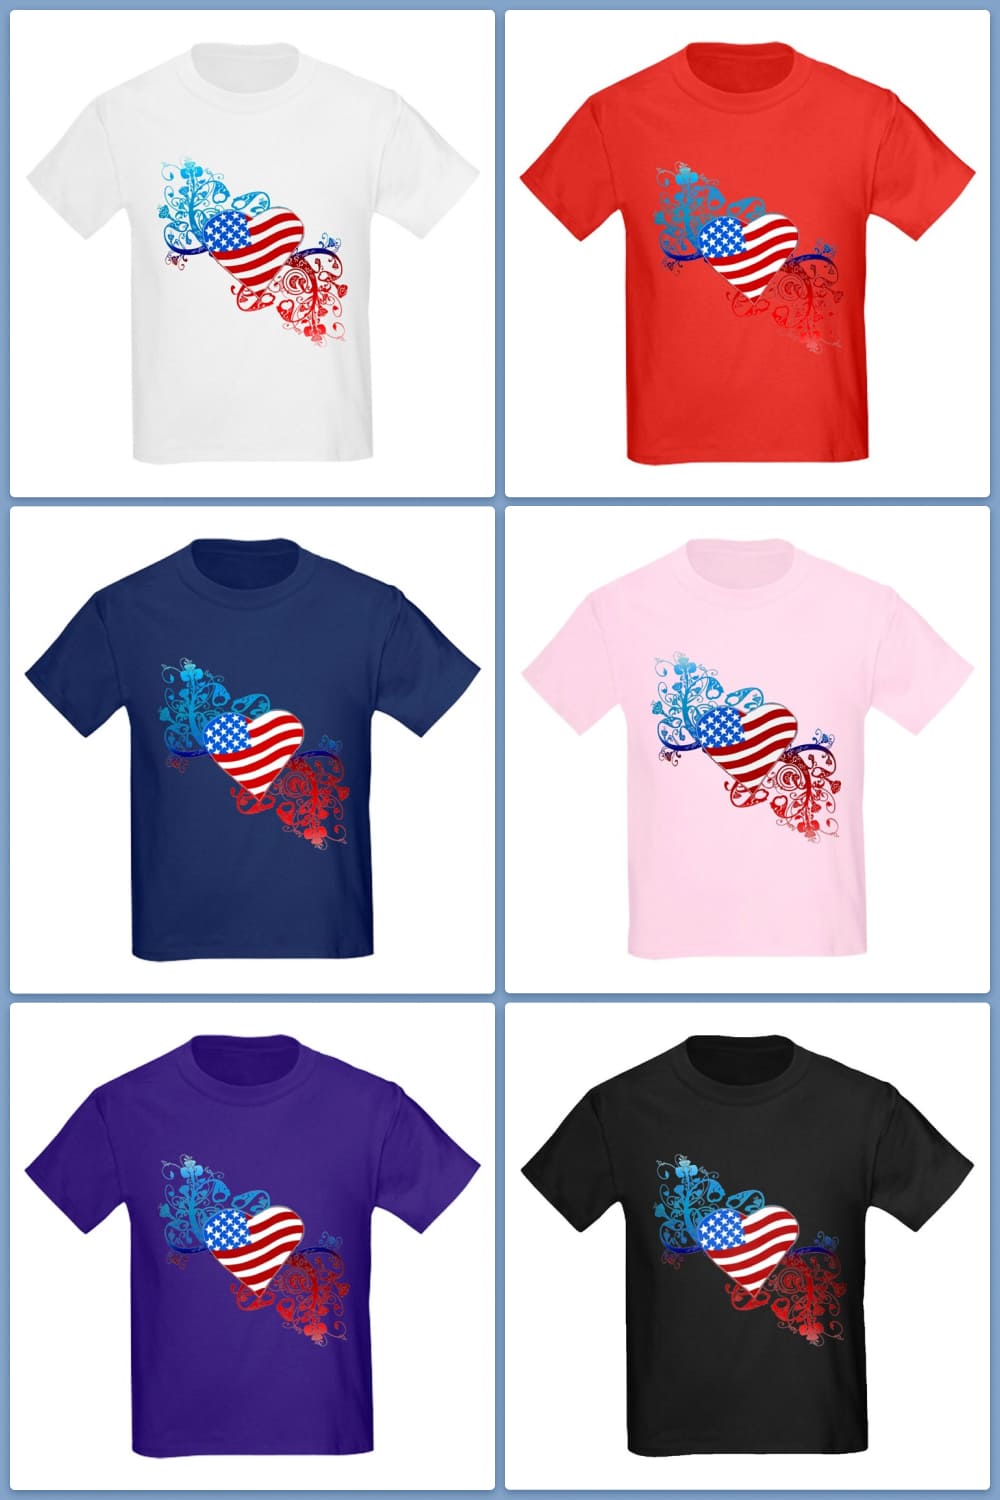 Collage of colorful t-shirts with a heart in USA colors.